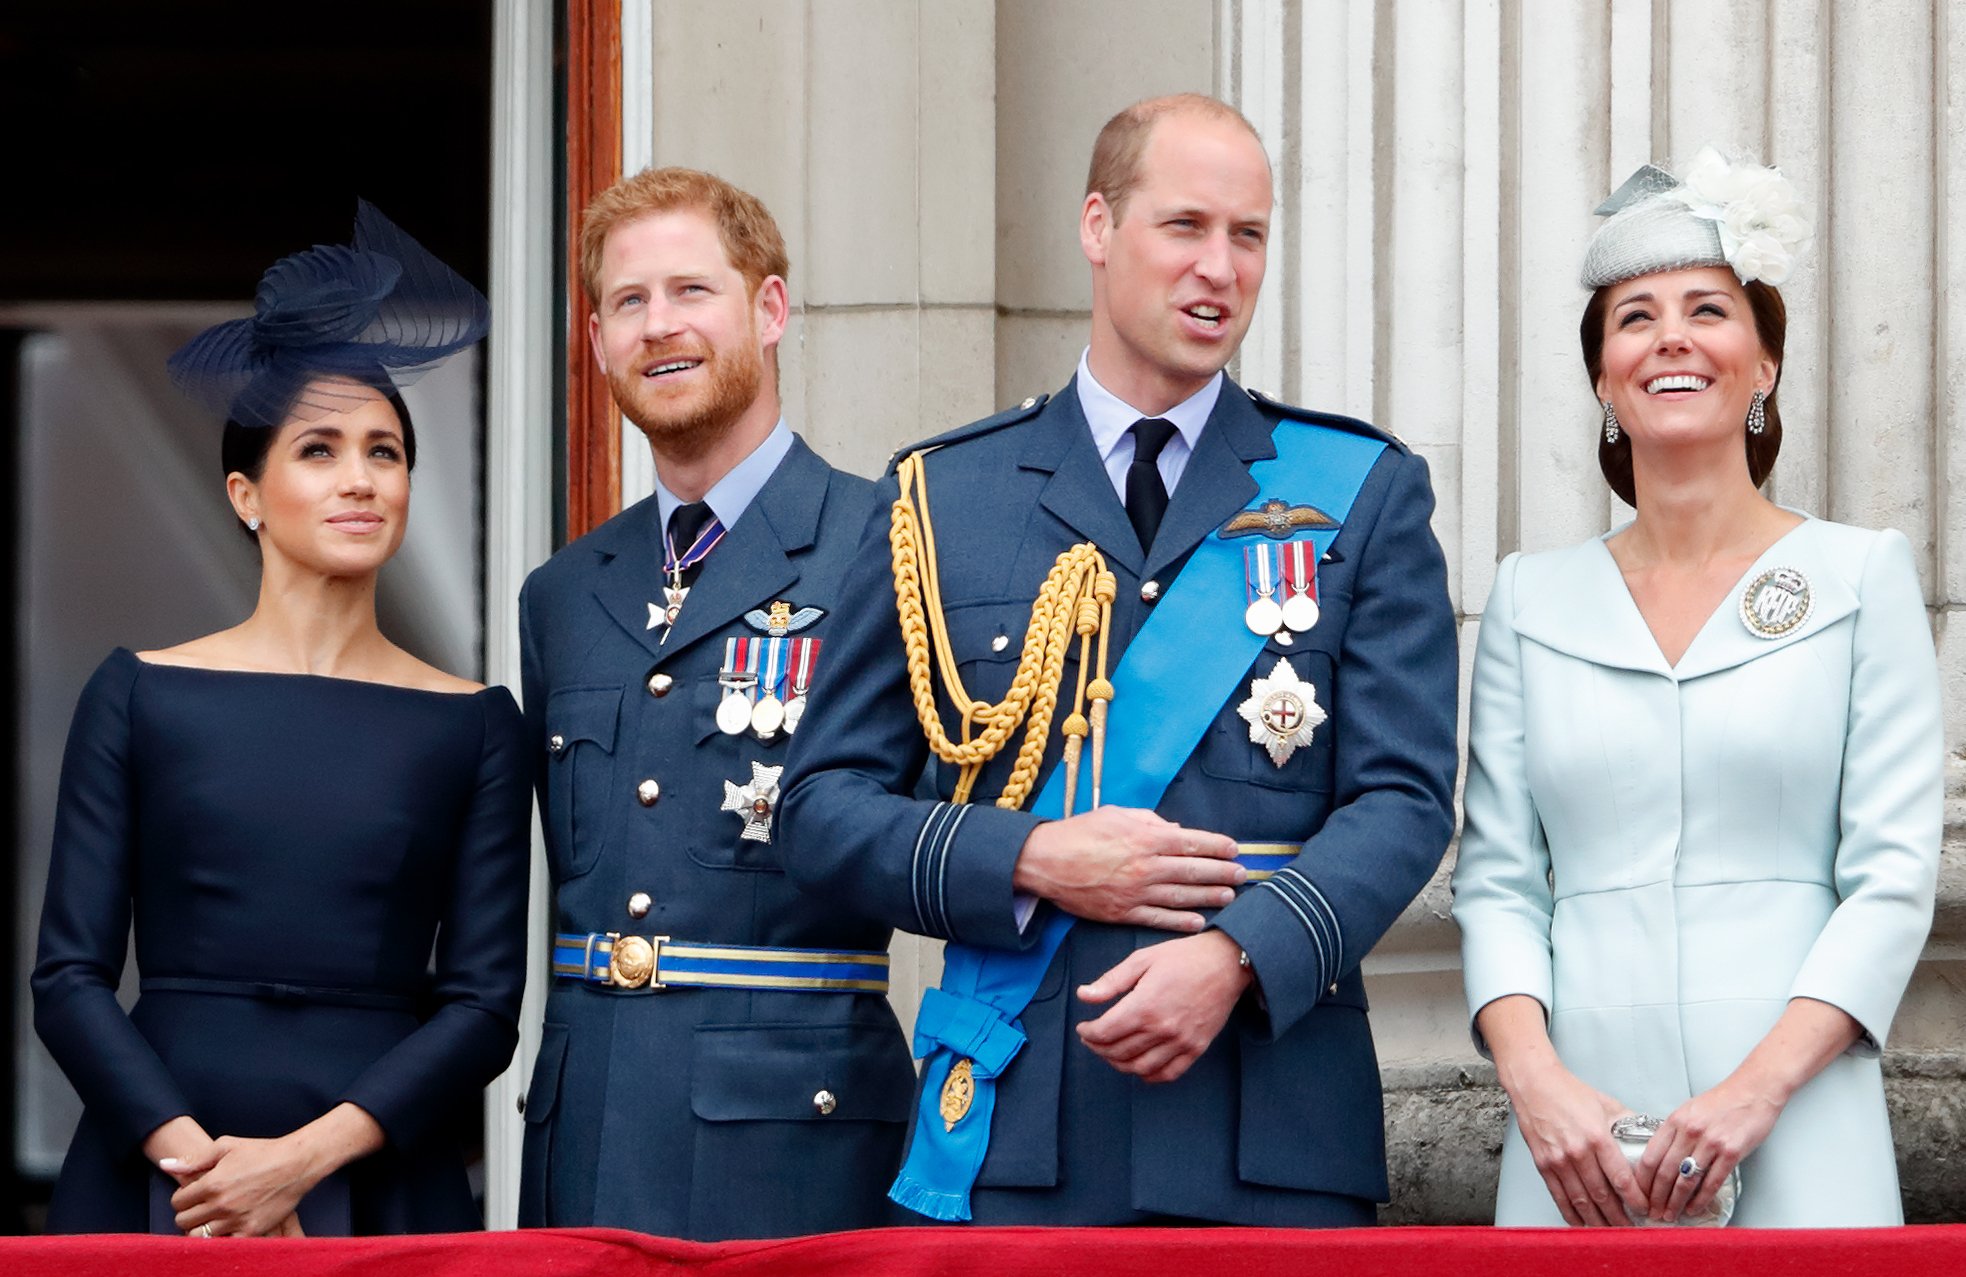 Meghan Markle, Prince Harry, Prince William and Kate Middleton observe a flypast to mark the Royal Air Force Centenary at the Buckingham Palace on July 10, 2018 | Photo: Getty Images